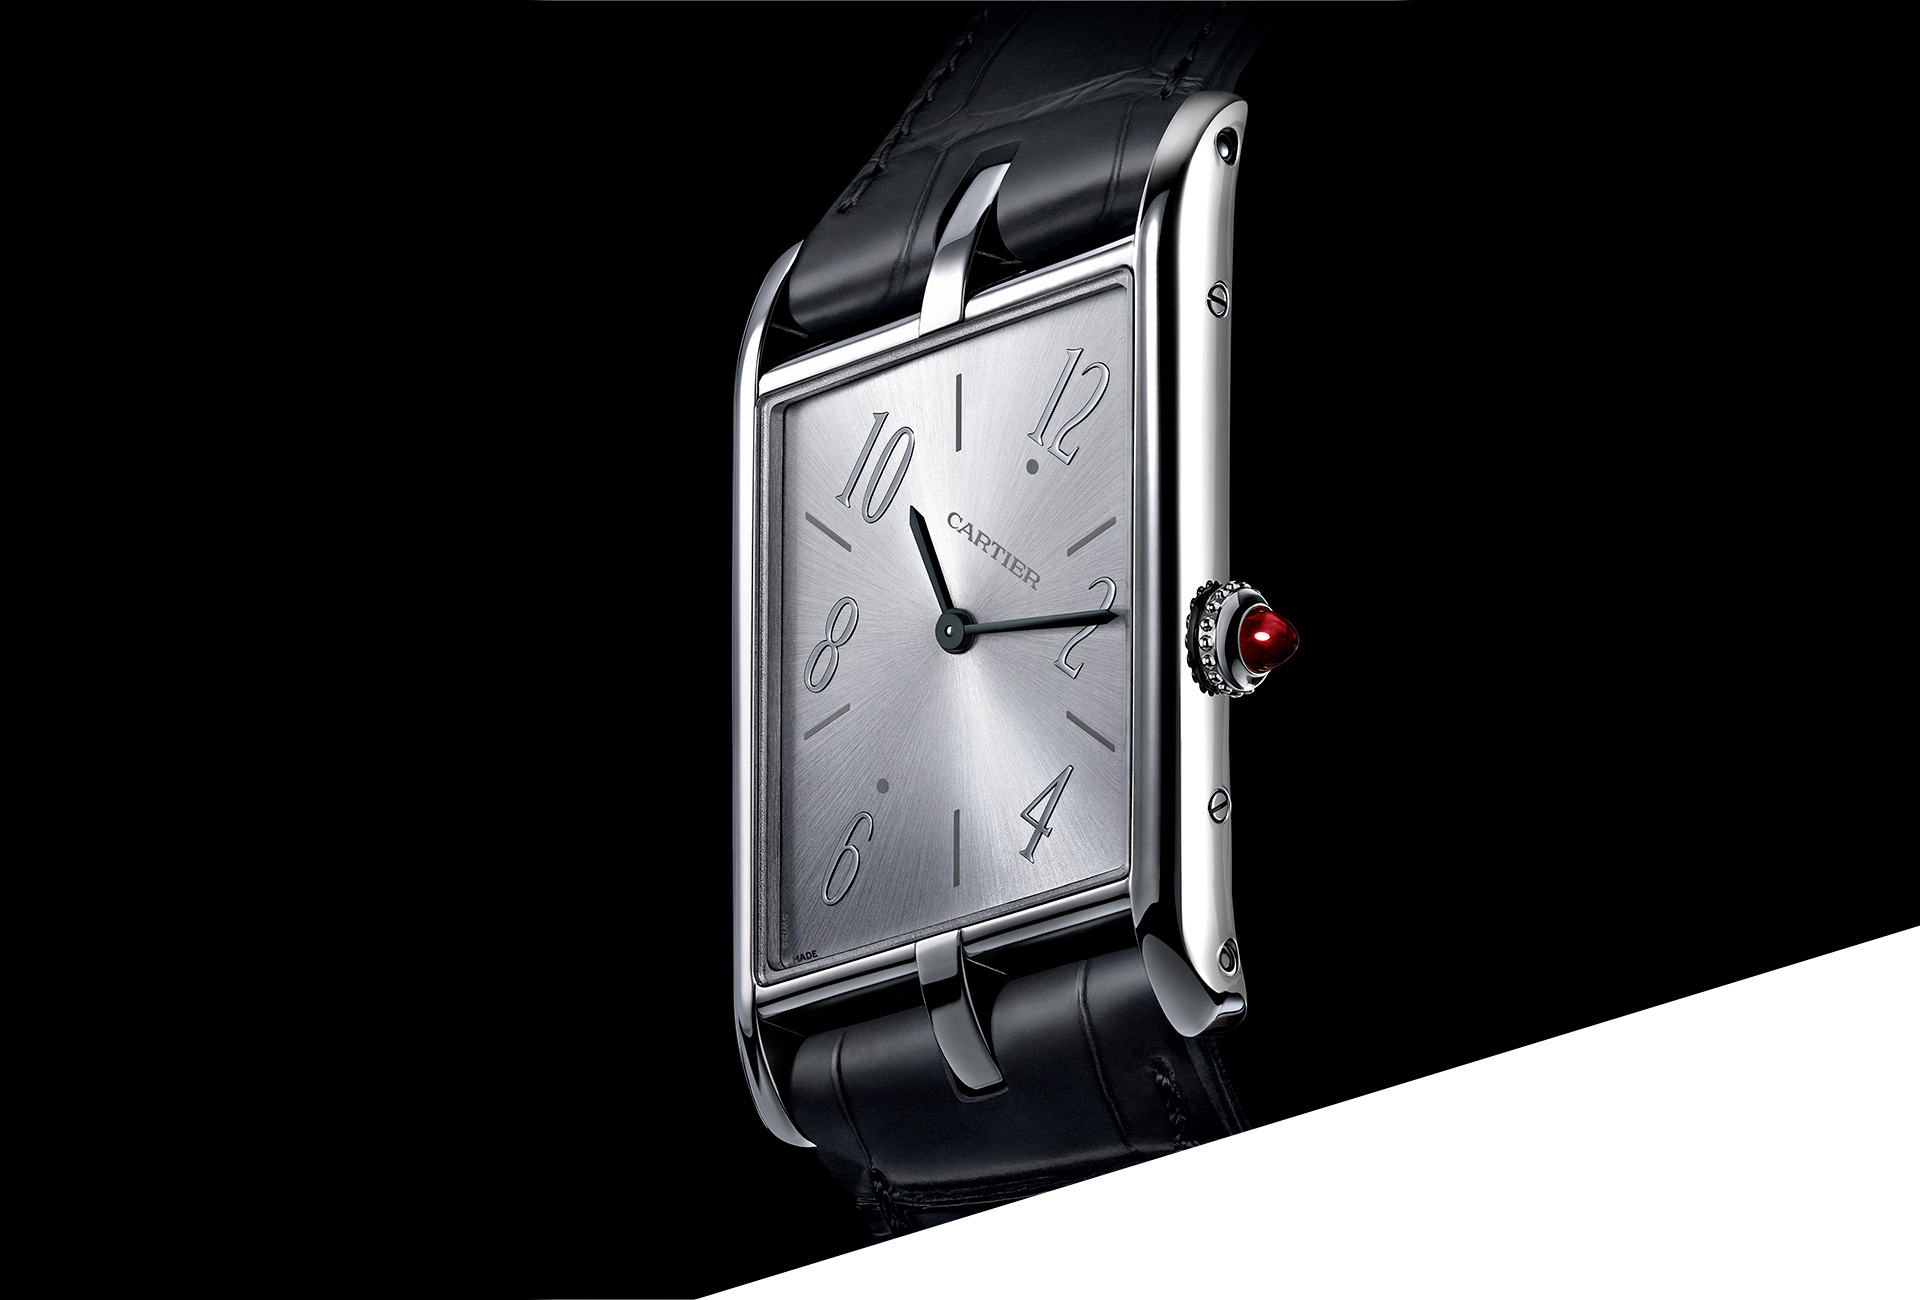 cartier at